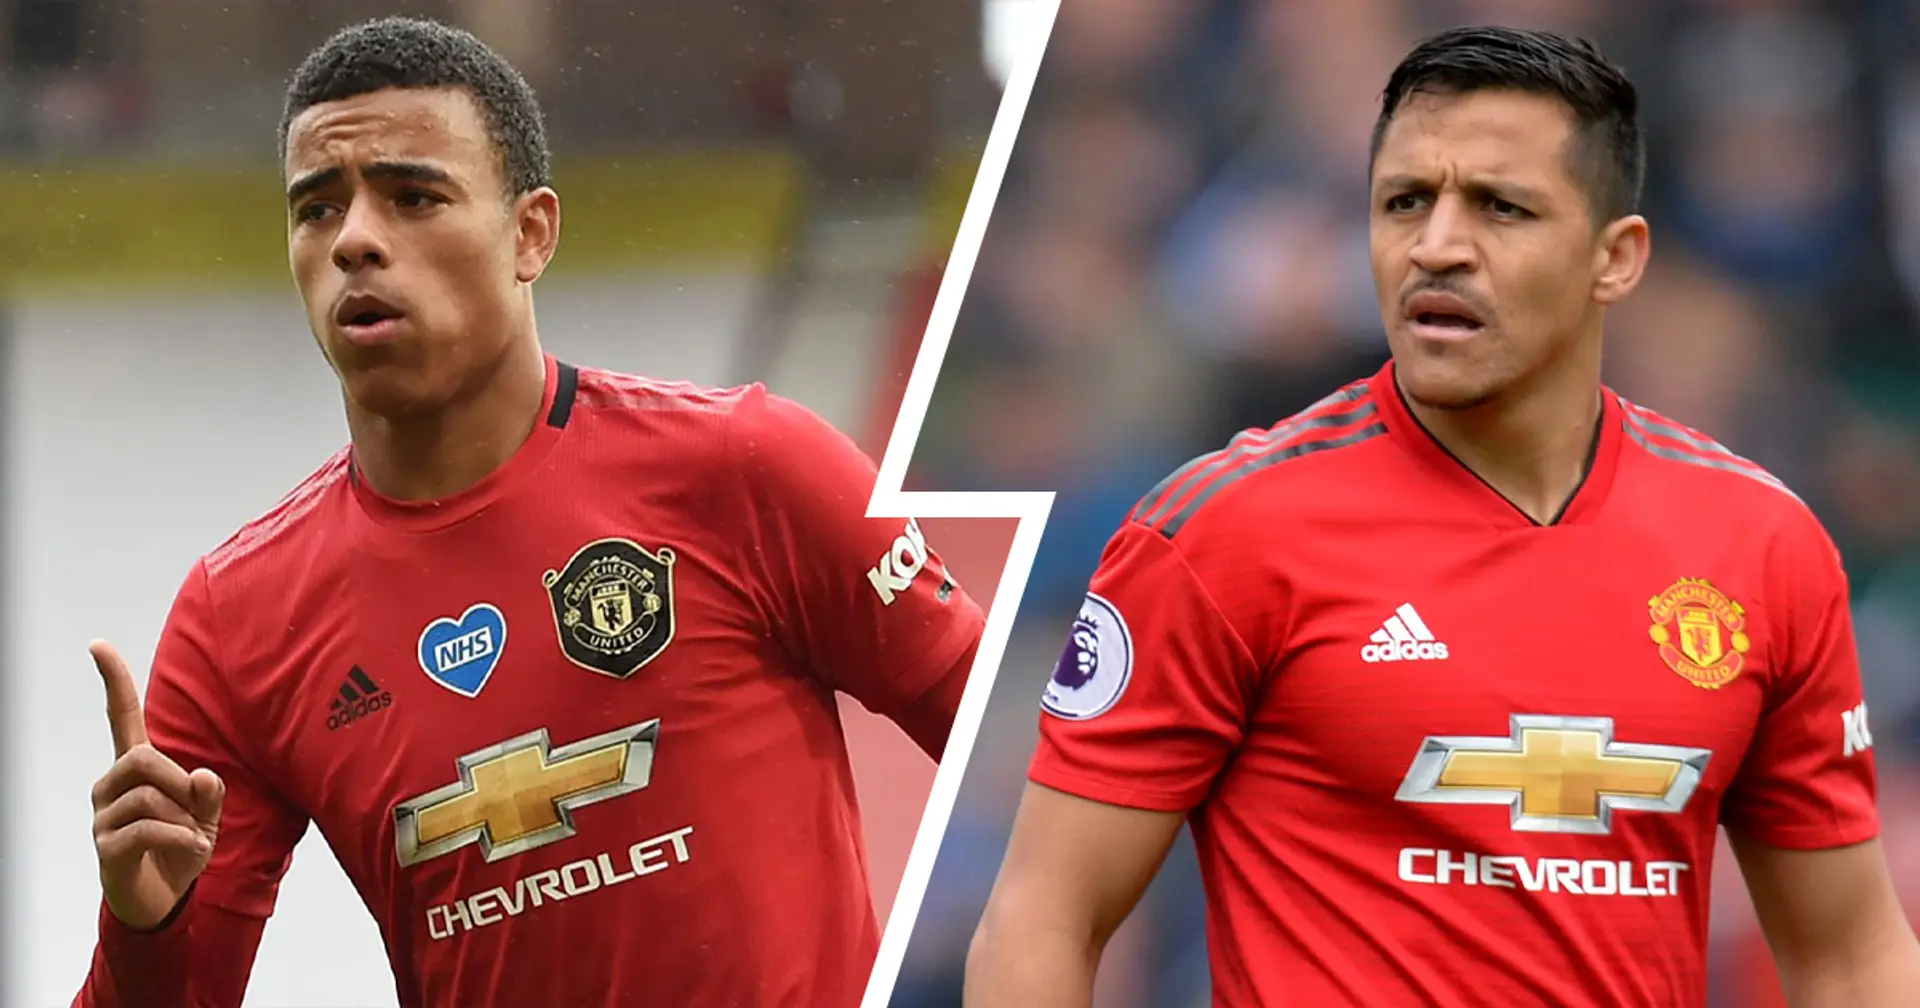 Mason Greenwood outscores Alexis Sanchez's overall tally at Man United - in just 9 games